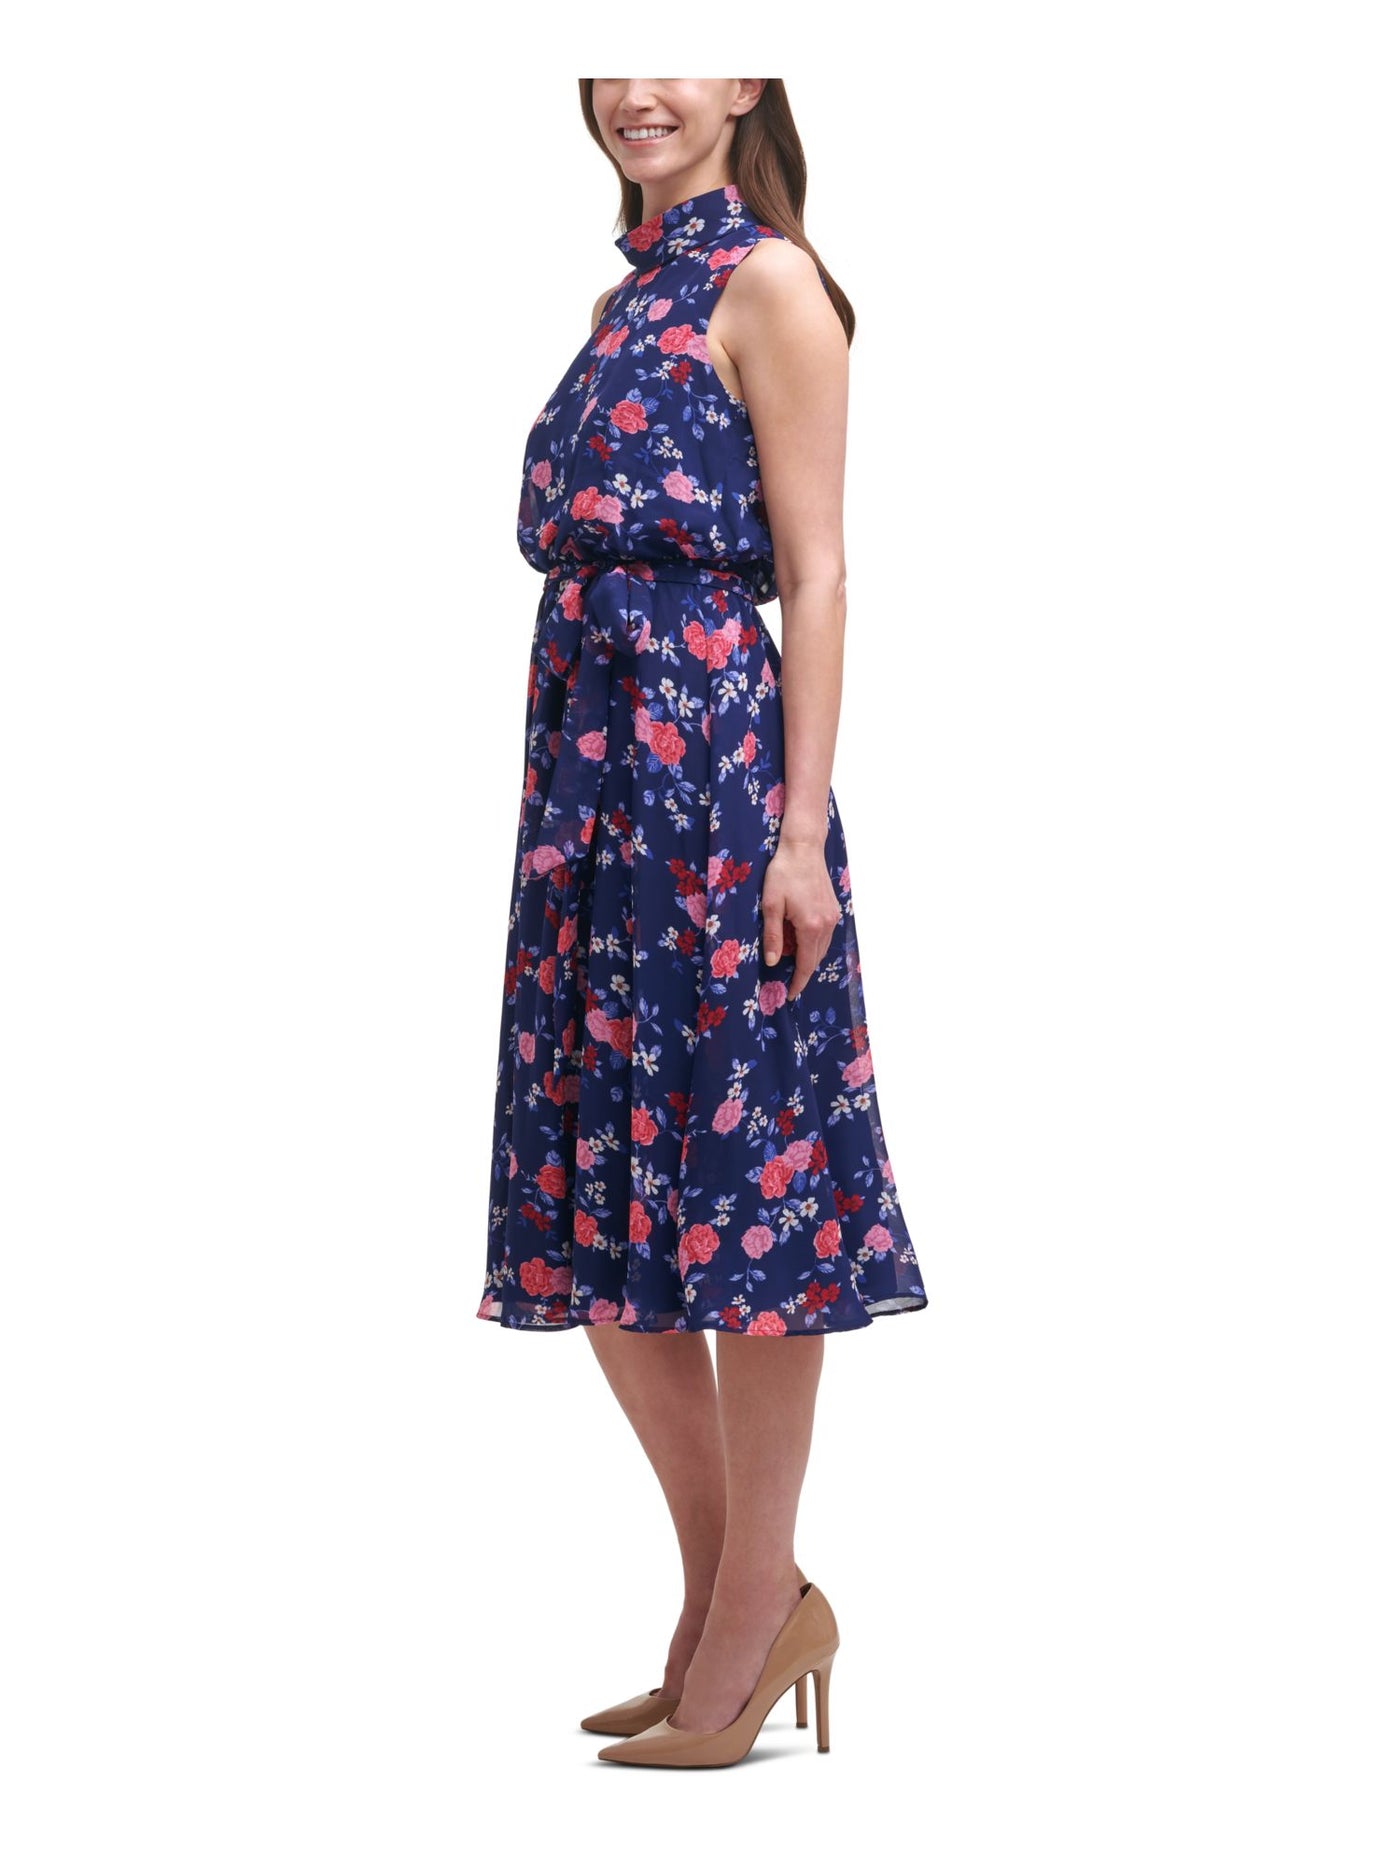 HARPER ROSE Womens Navy Zippered Belted Mock Roll-neck Chiffon Floral Sleeveless Midi Wear To Work Fit + Flare Dress 4